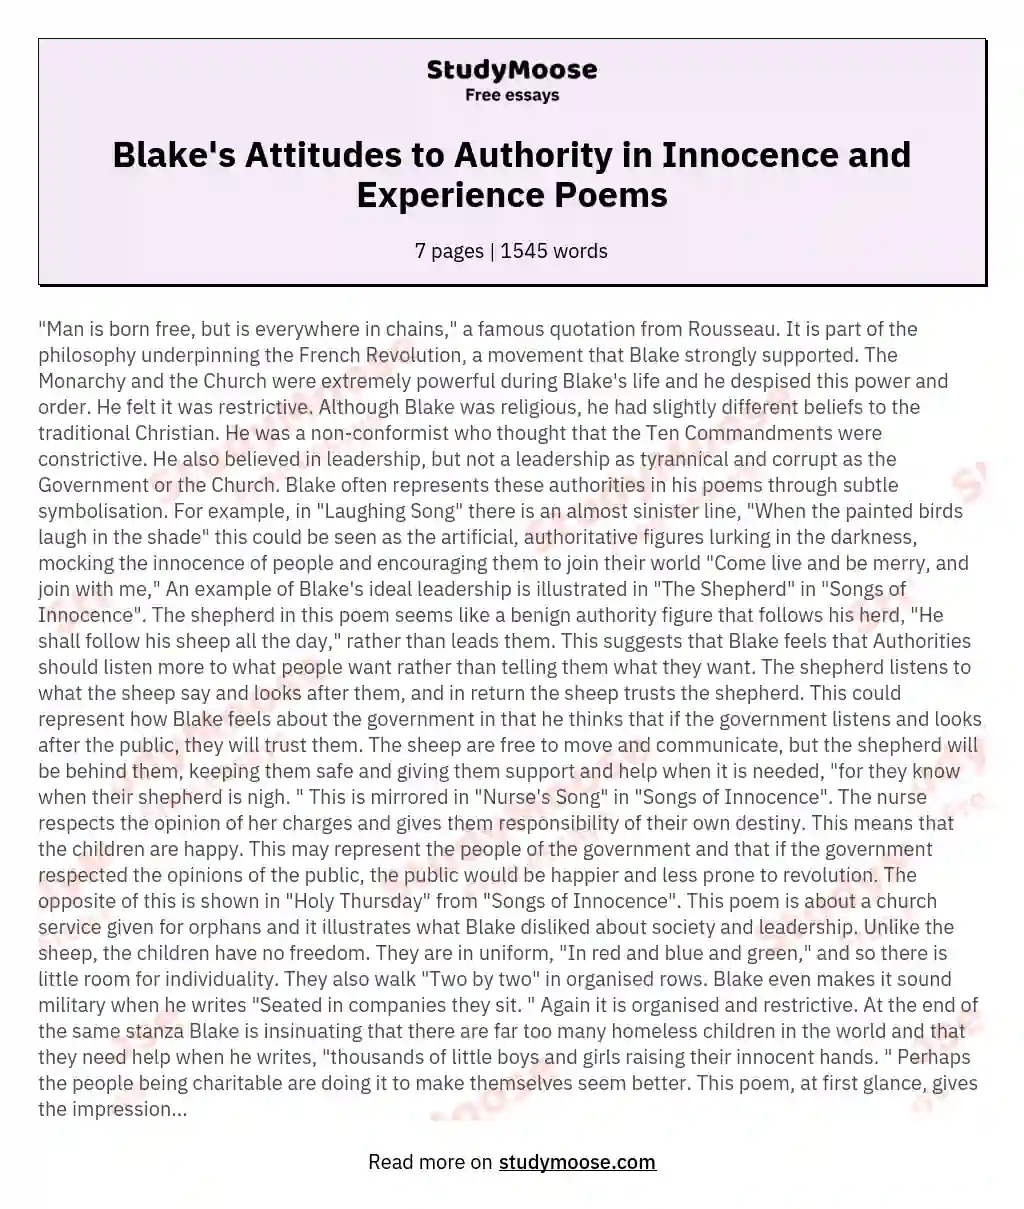 Blake's Attitudes to Authority in Innocence and Experience Poems essay